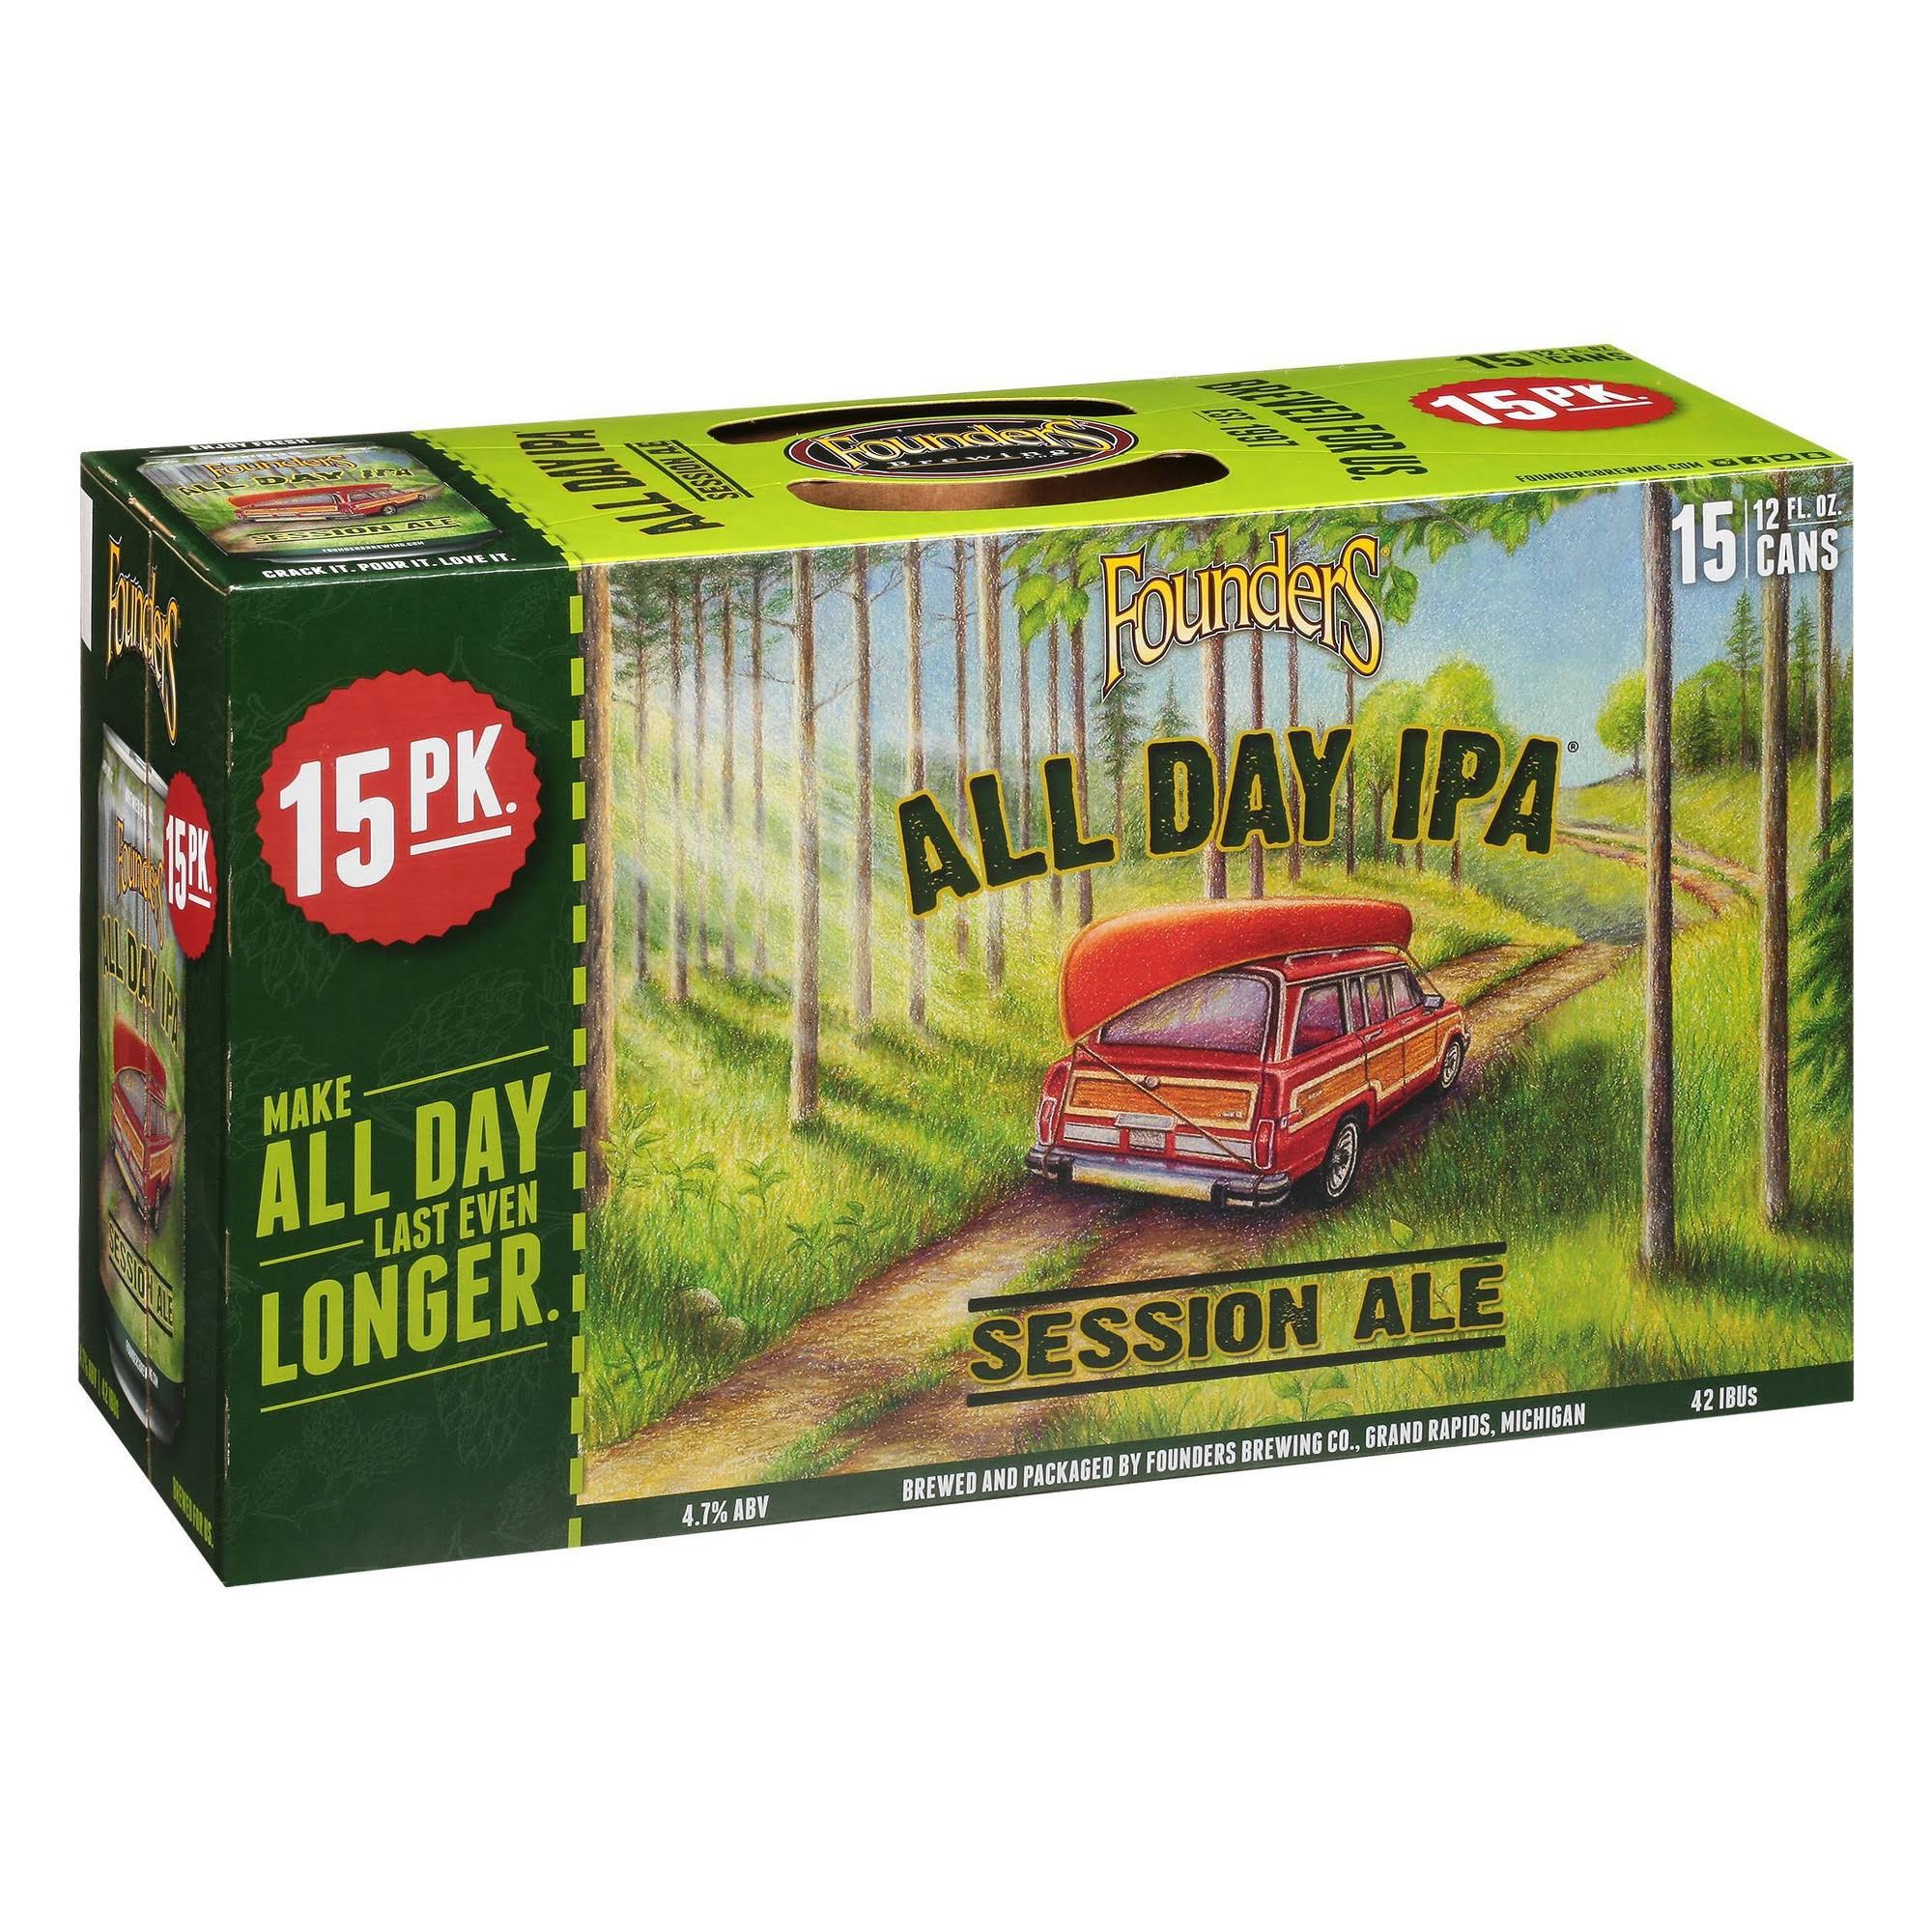 Founders Brewing All Day IPA - 15 pack, 12 fl oz cans